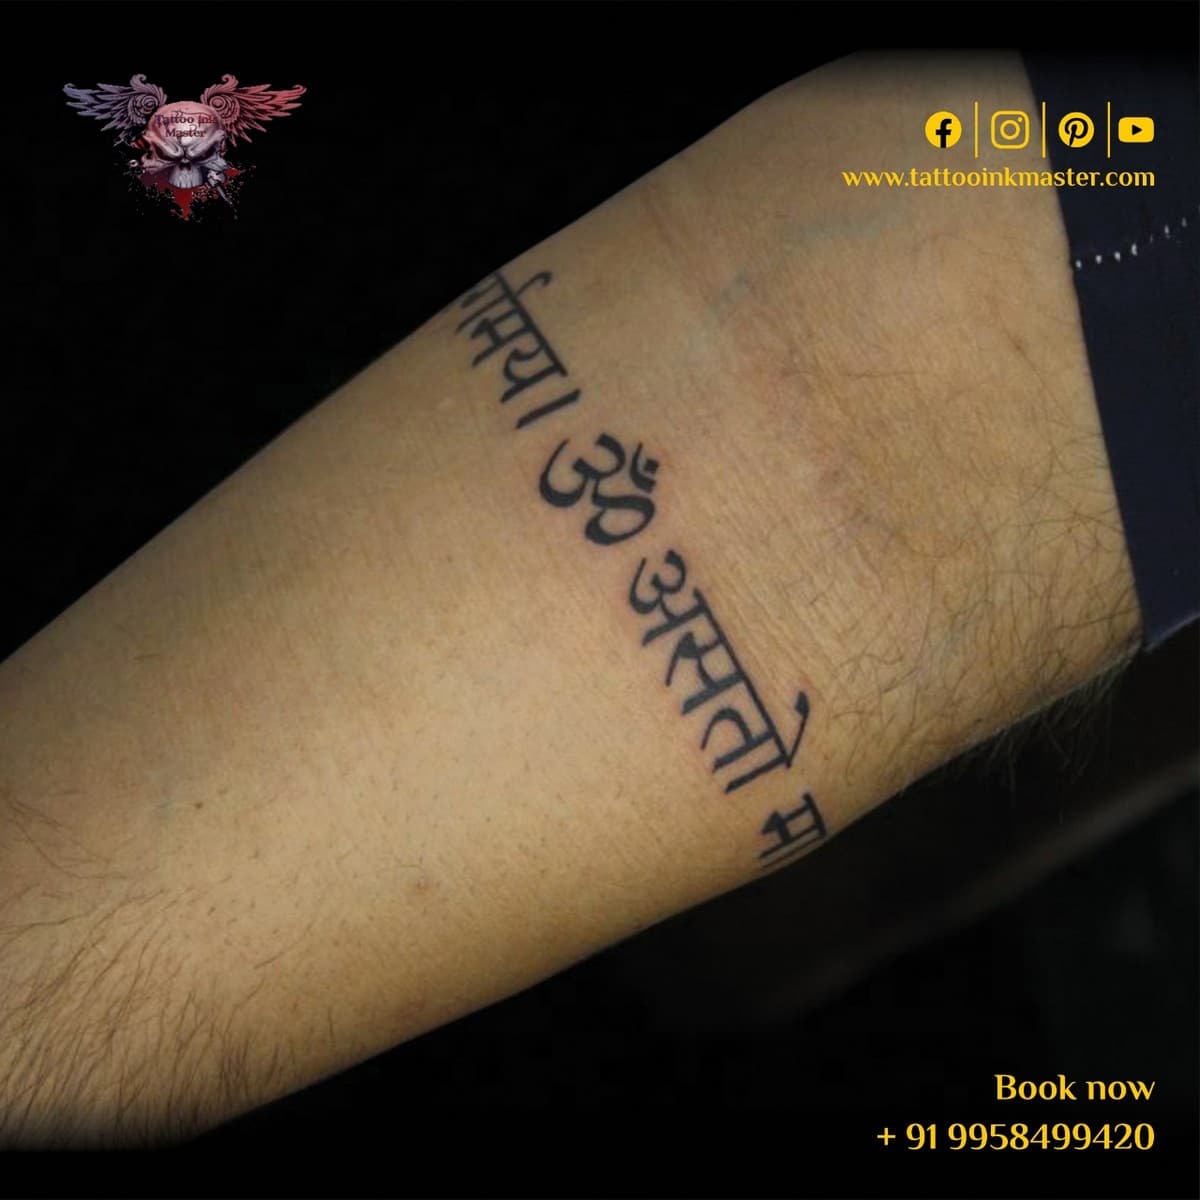 23 Tattoos For Good Luck: Symbols Of Protection And Positive Energy » One  Of India's Best Tattoo Studios In Bangalore - Eternal Expression | Best Tattoo  Artist In Bangalore | Best Tattoo